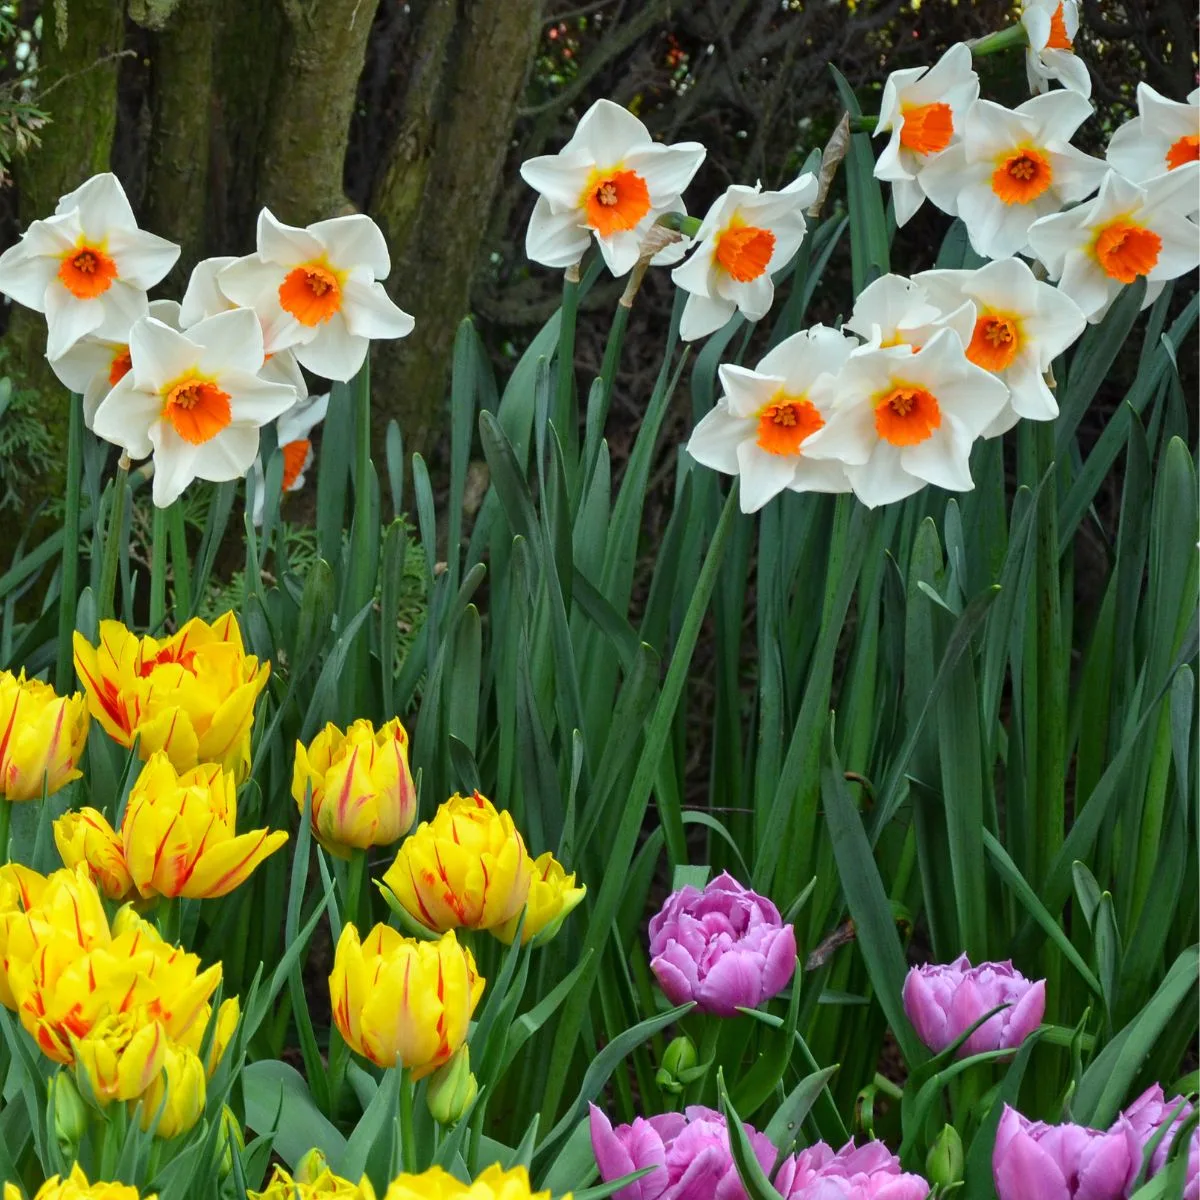 White daffodils with bright orange centers, surrounded by yellow and purple tulips. 